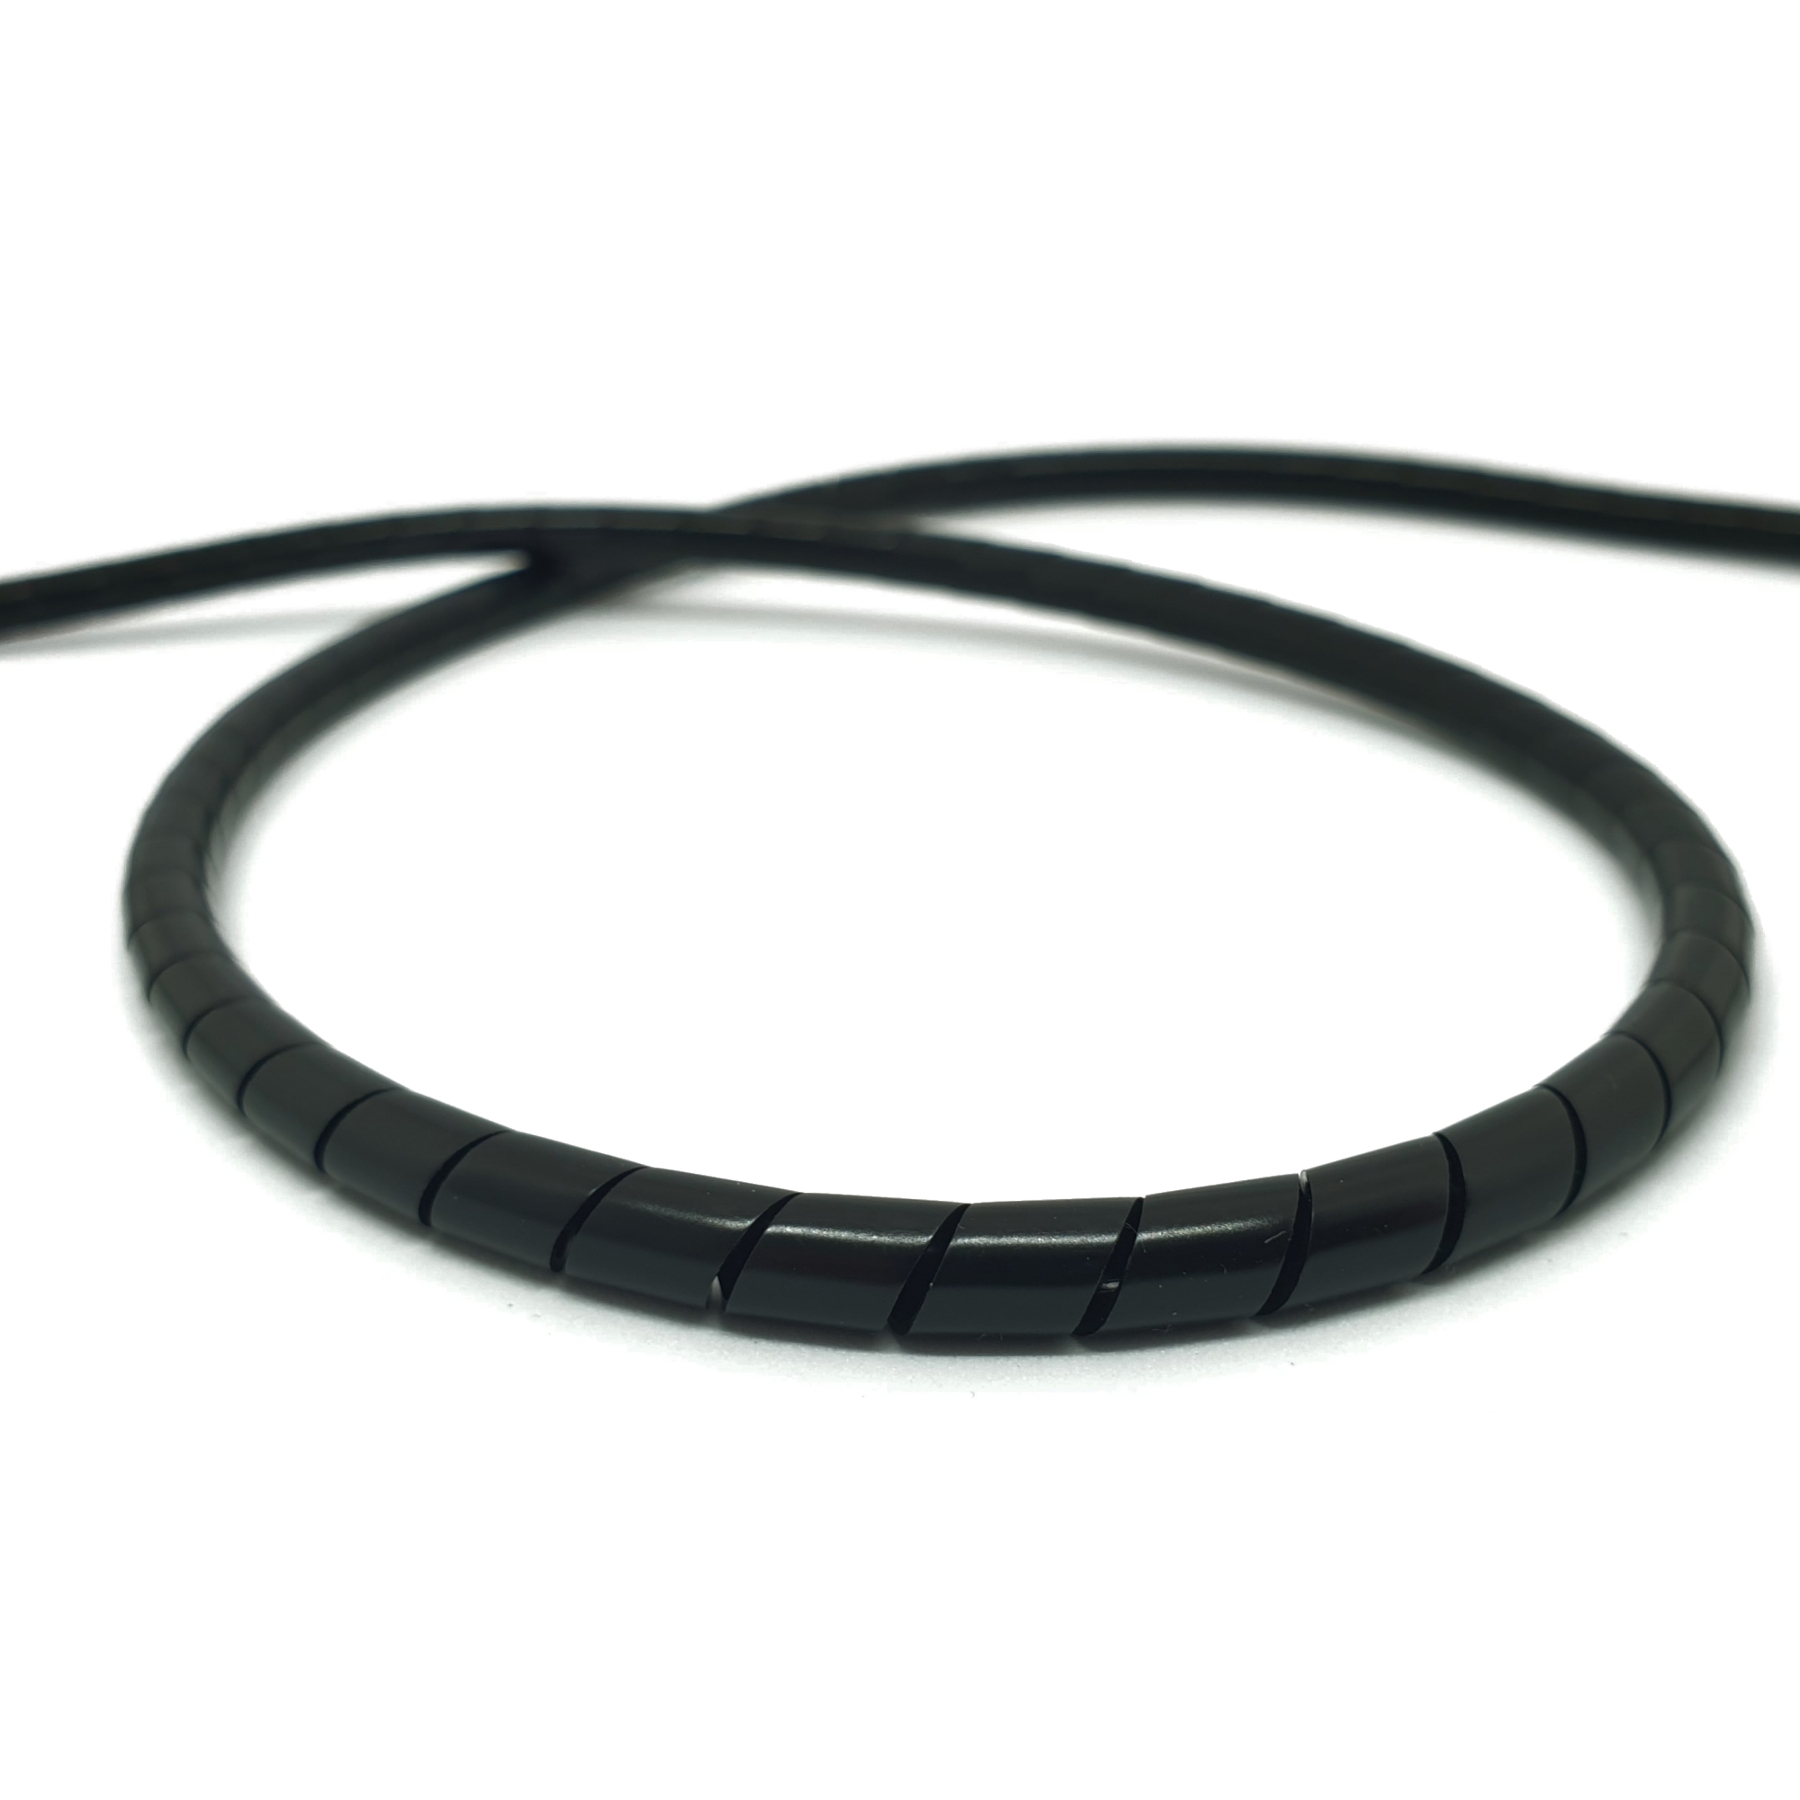 Picture of capgo Blue Line Spiral Wrap for Outer Cable / Wire Organization - 2000 mm - black